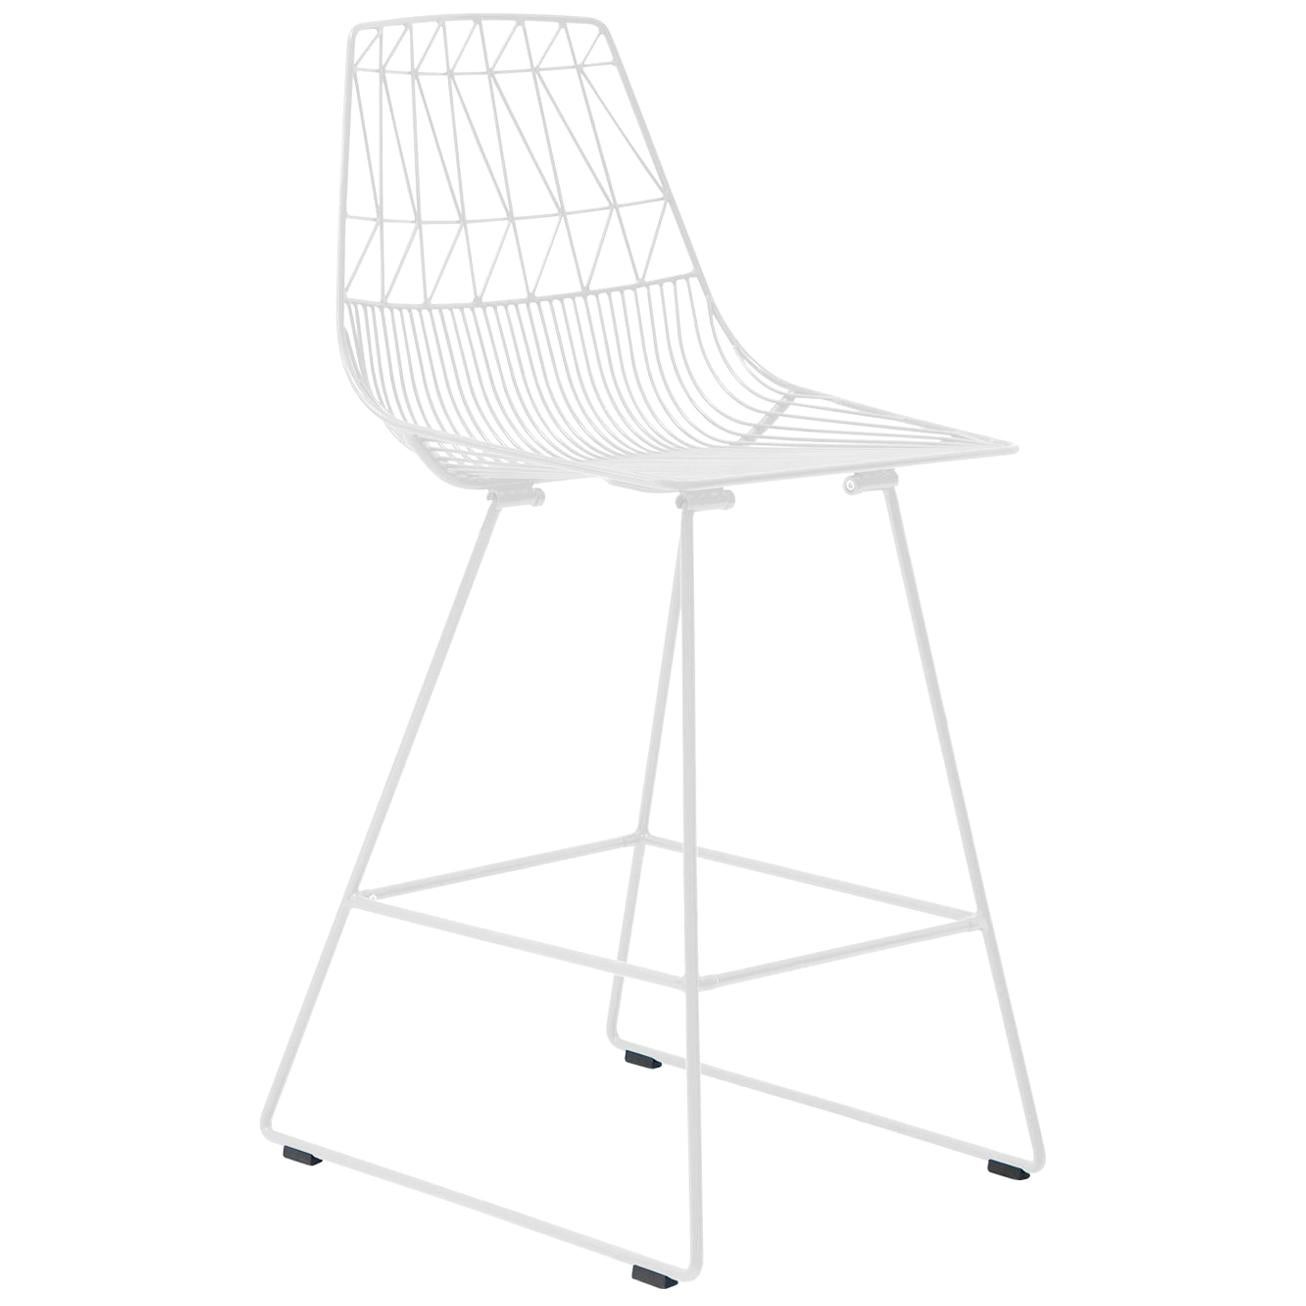 Mid-Century Modern, Minimalist Counter Wire Stool, in White by Bend Goods